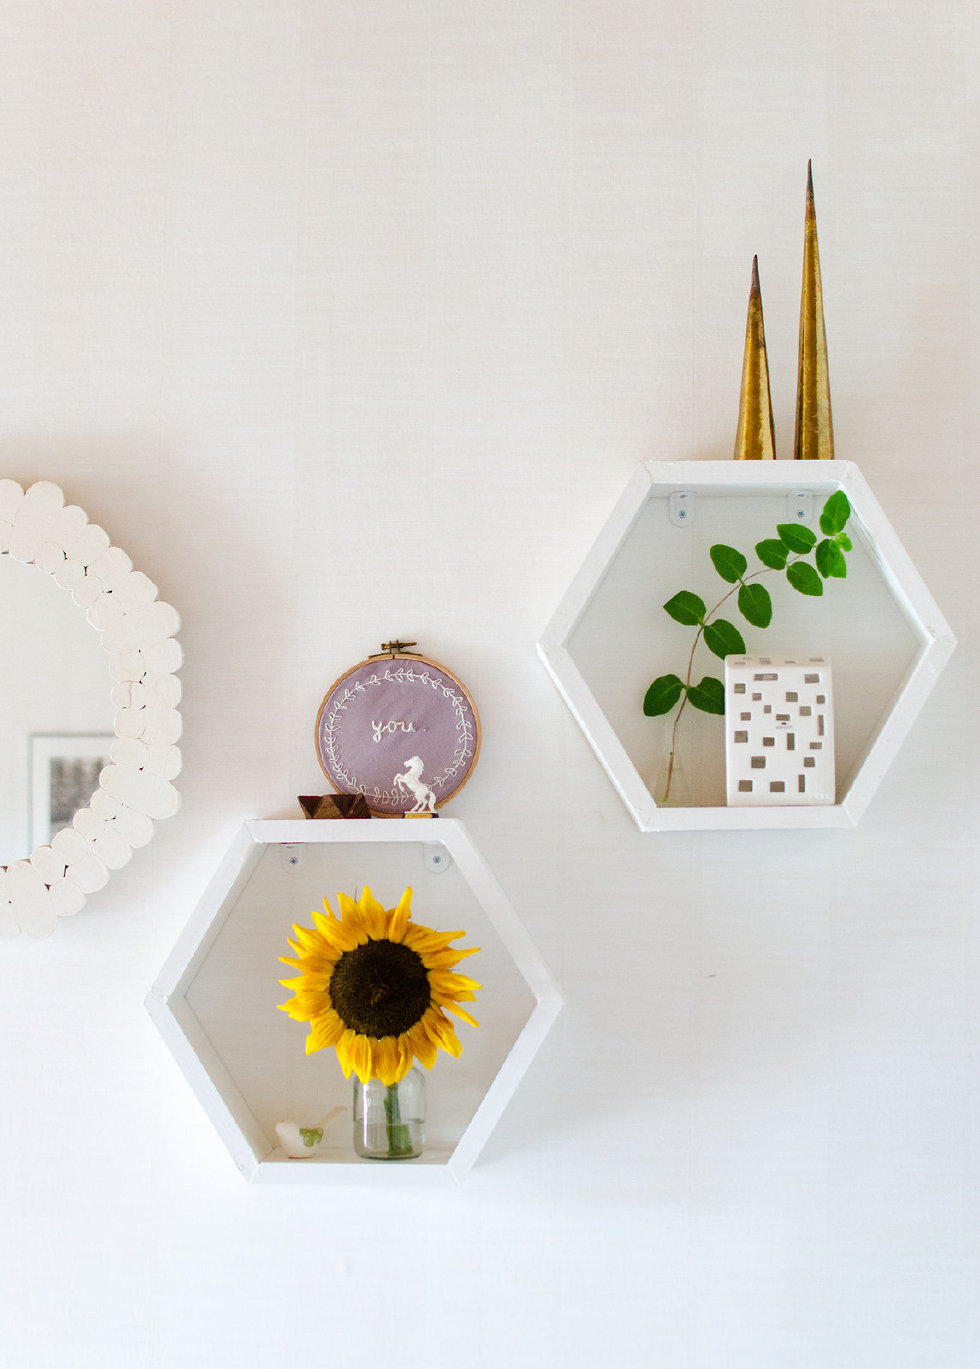 Honeycomb shelves for the wall